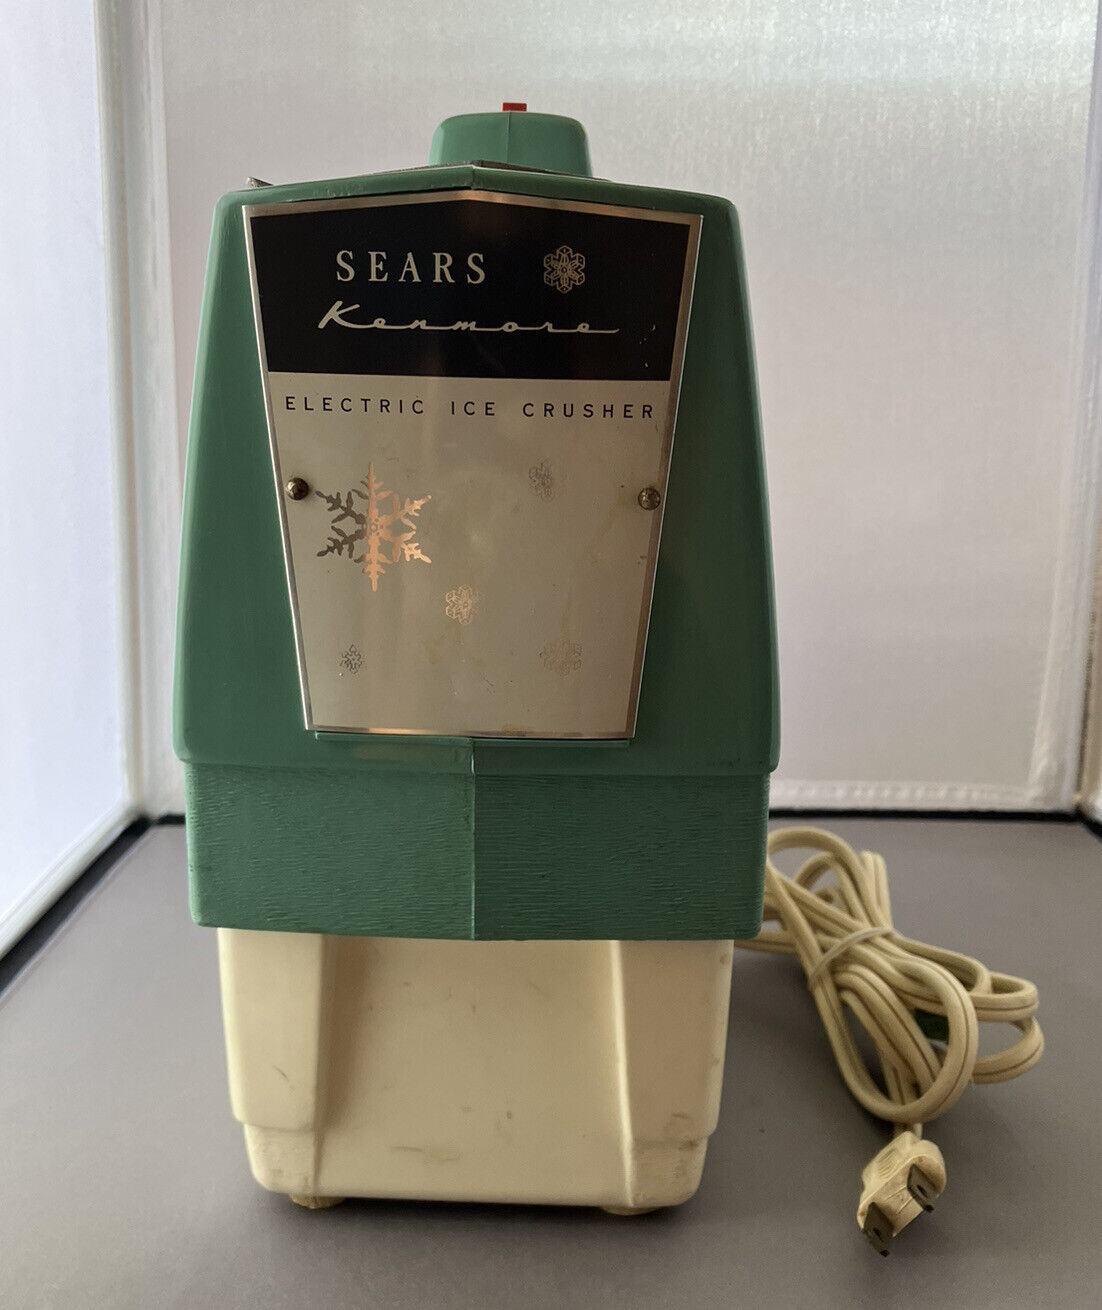 Vintage Sears Electric Ice Crusher #4559, great piece of operable nostalgia